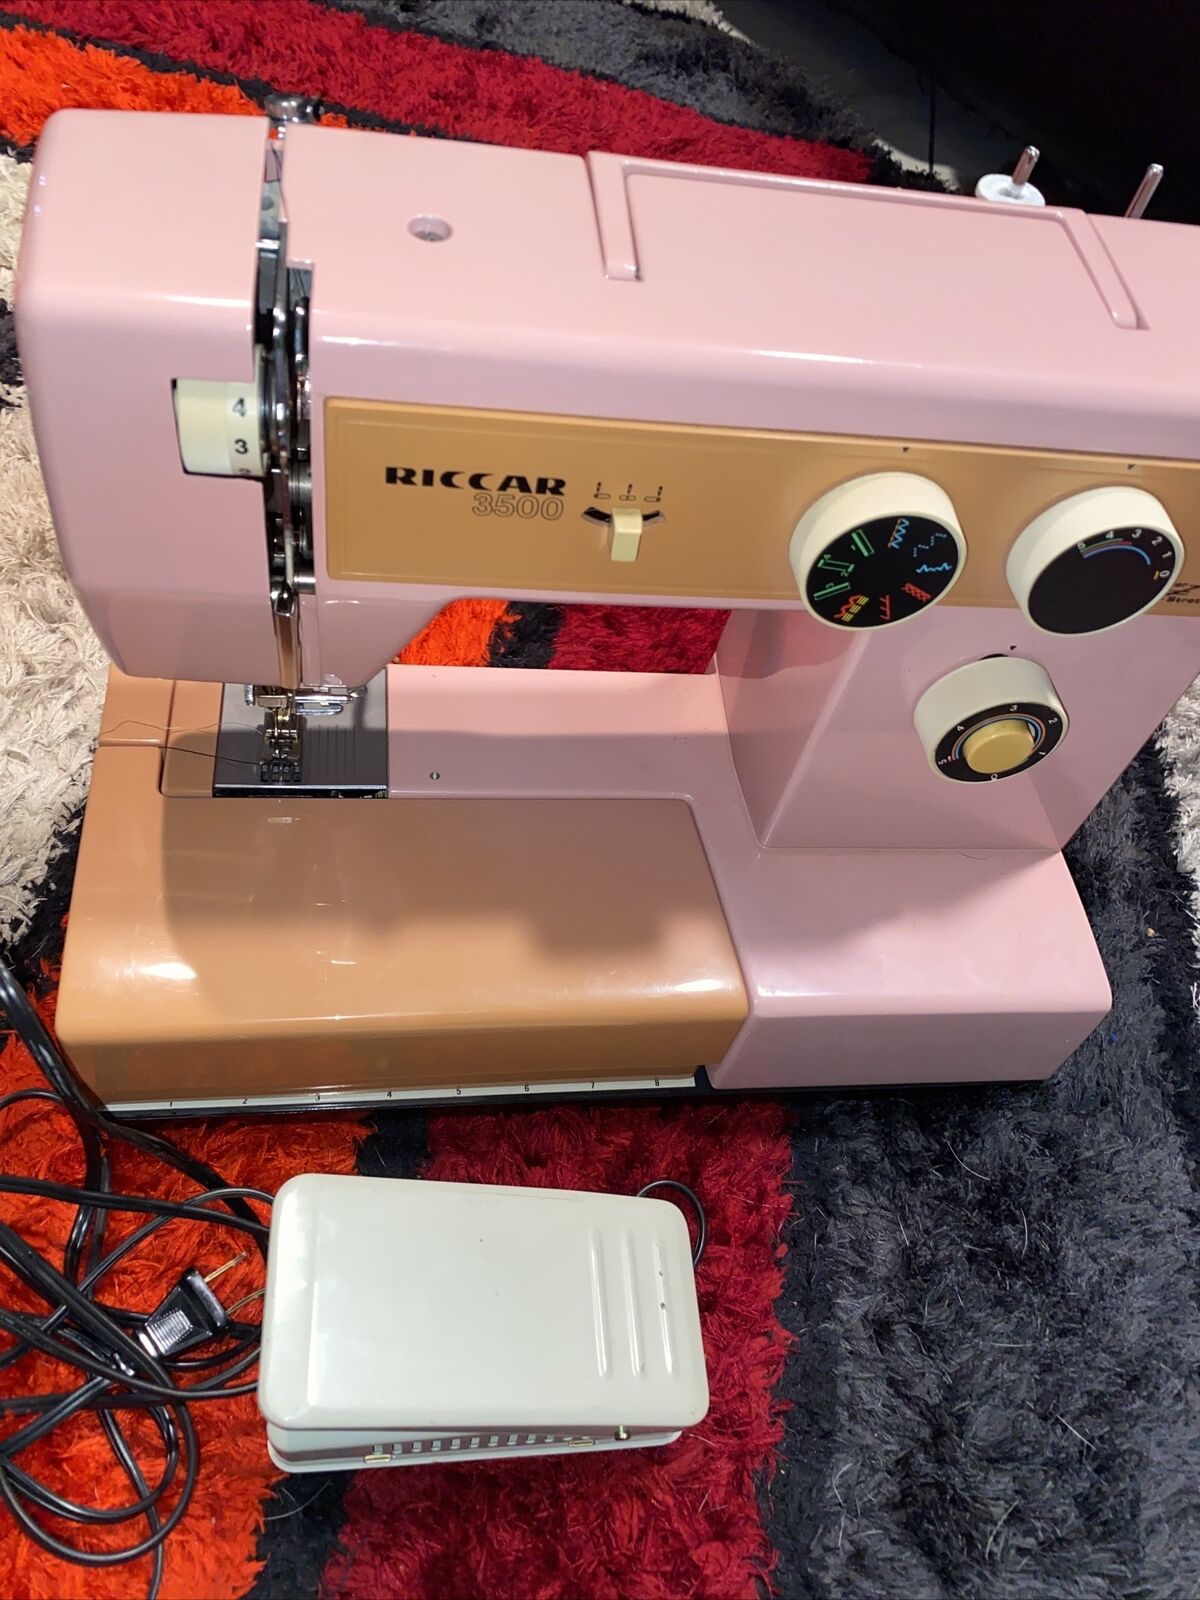 riccar super stretch 3500 Pink Peach Color Sewing Machine Vintage Power Only